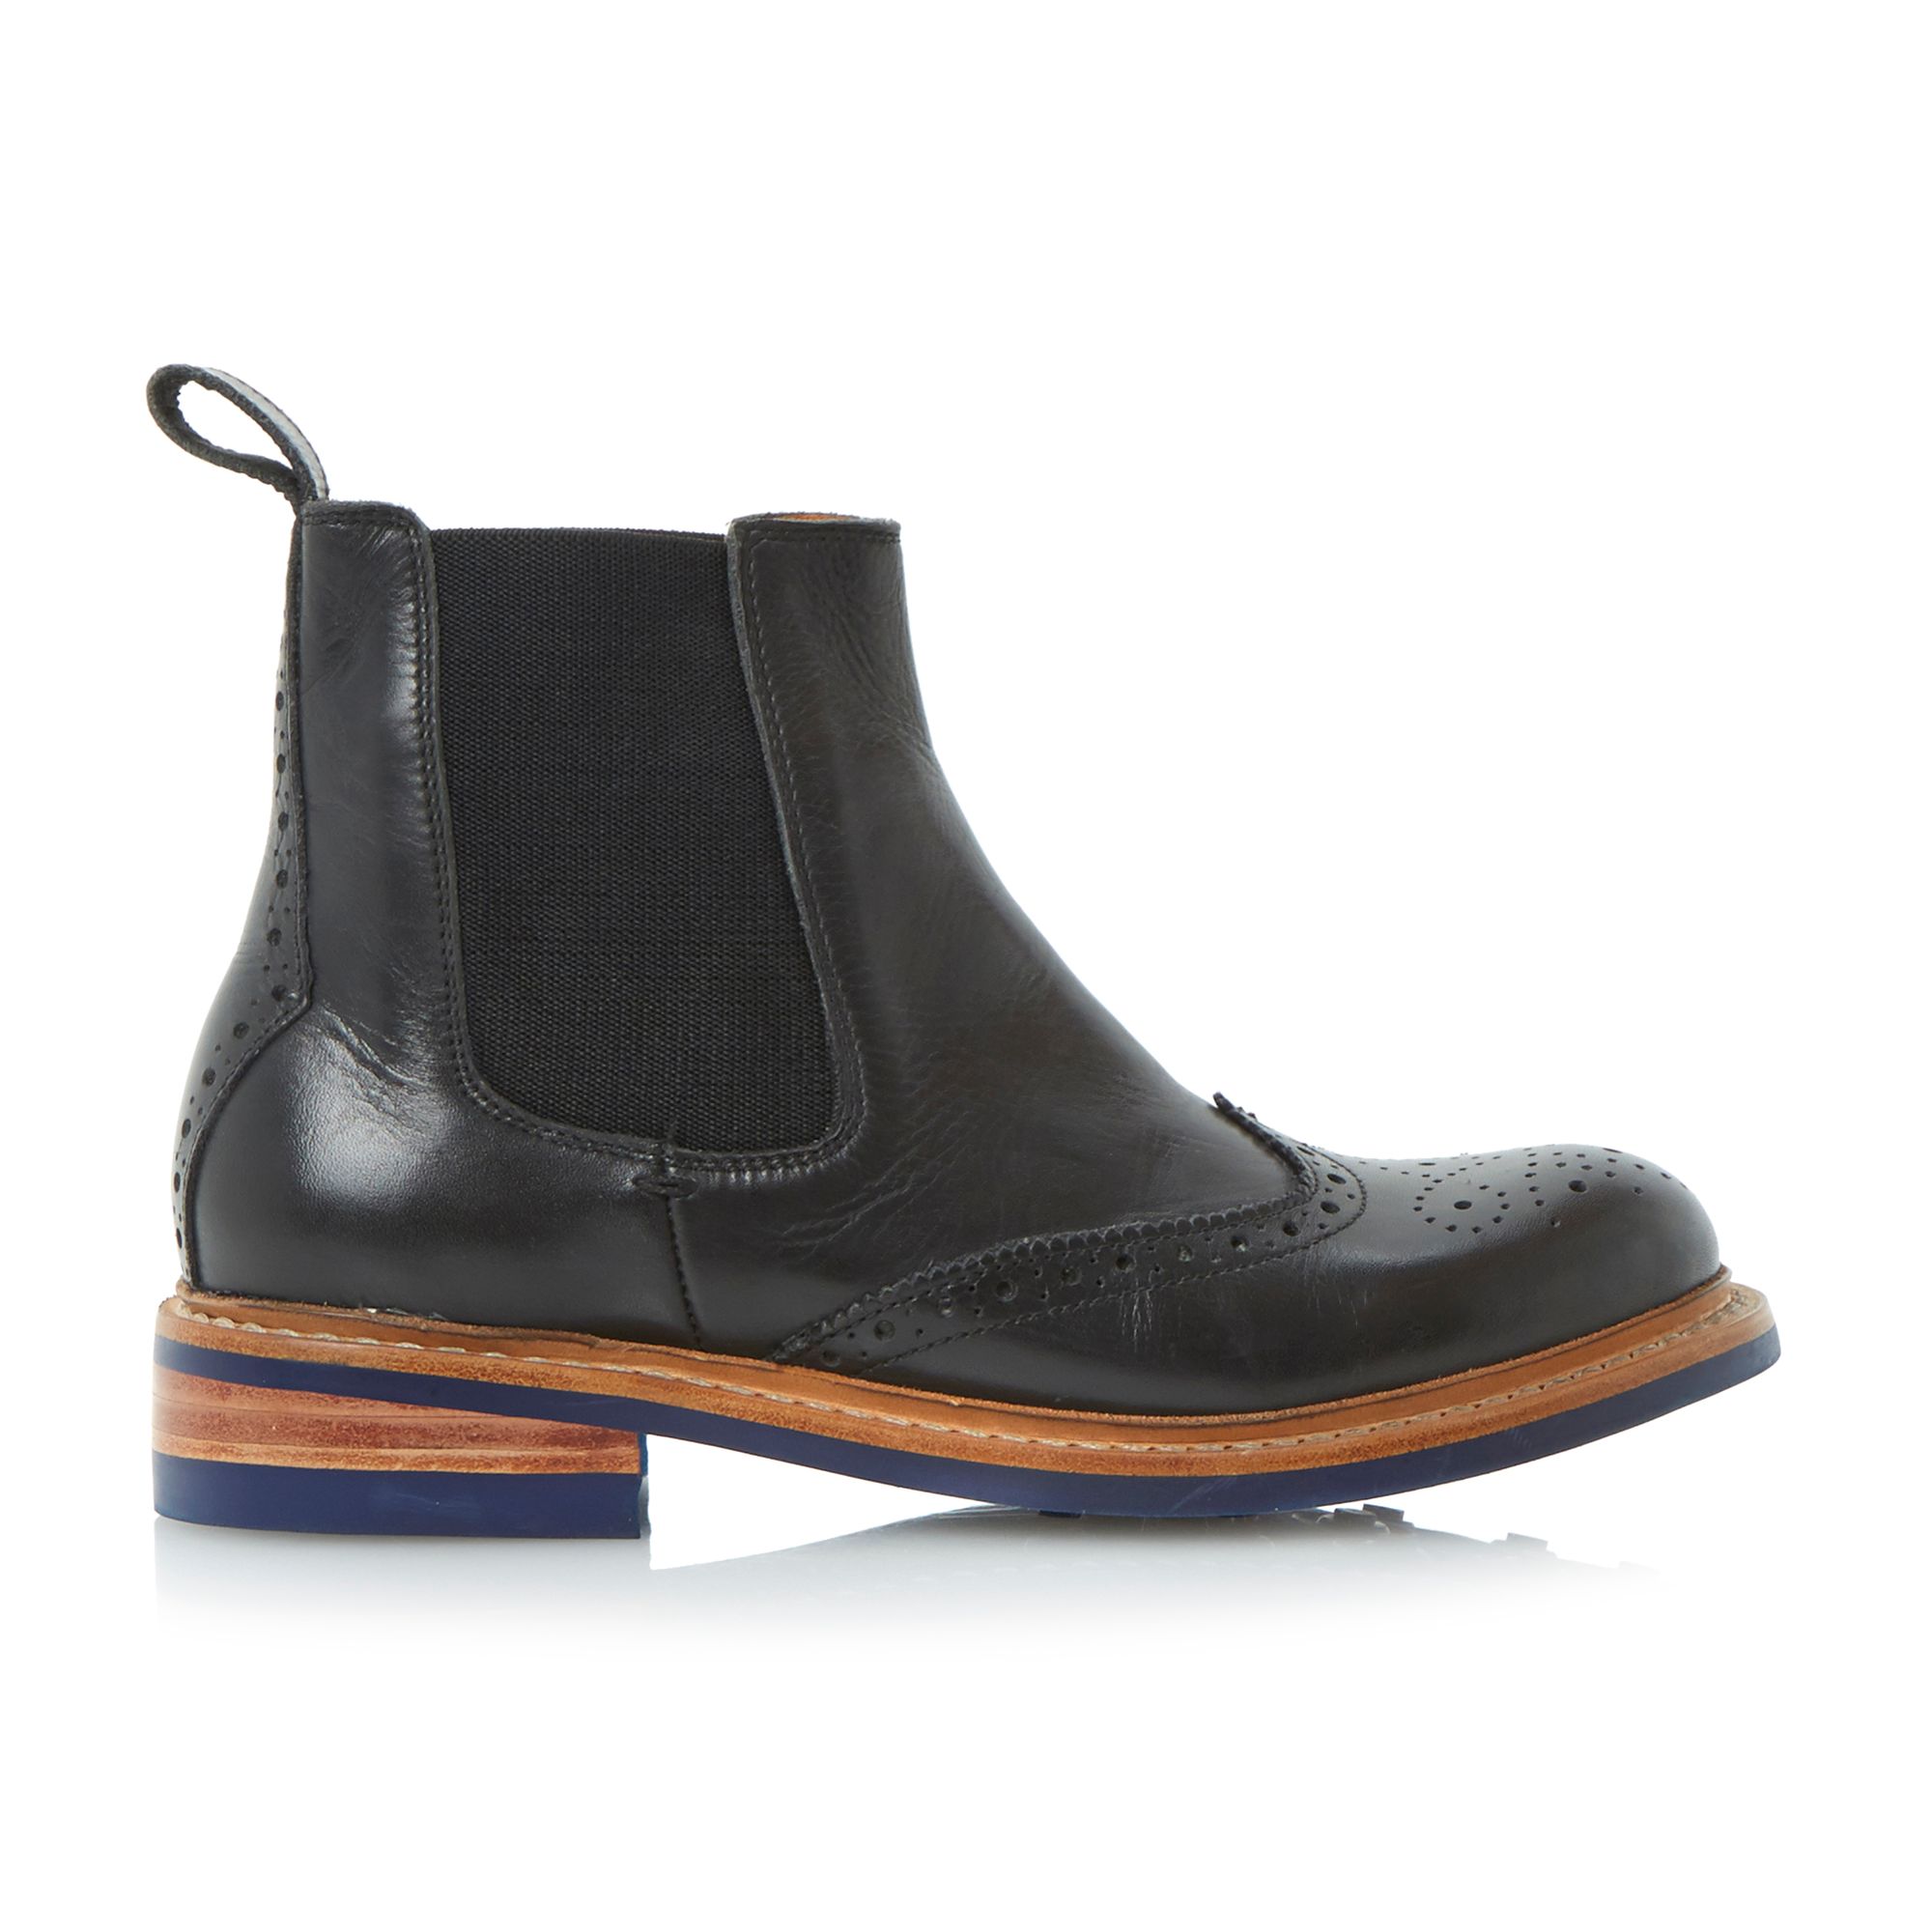 Bertie Perkin Chunky Leather Brogue Ankle Boots, Black